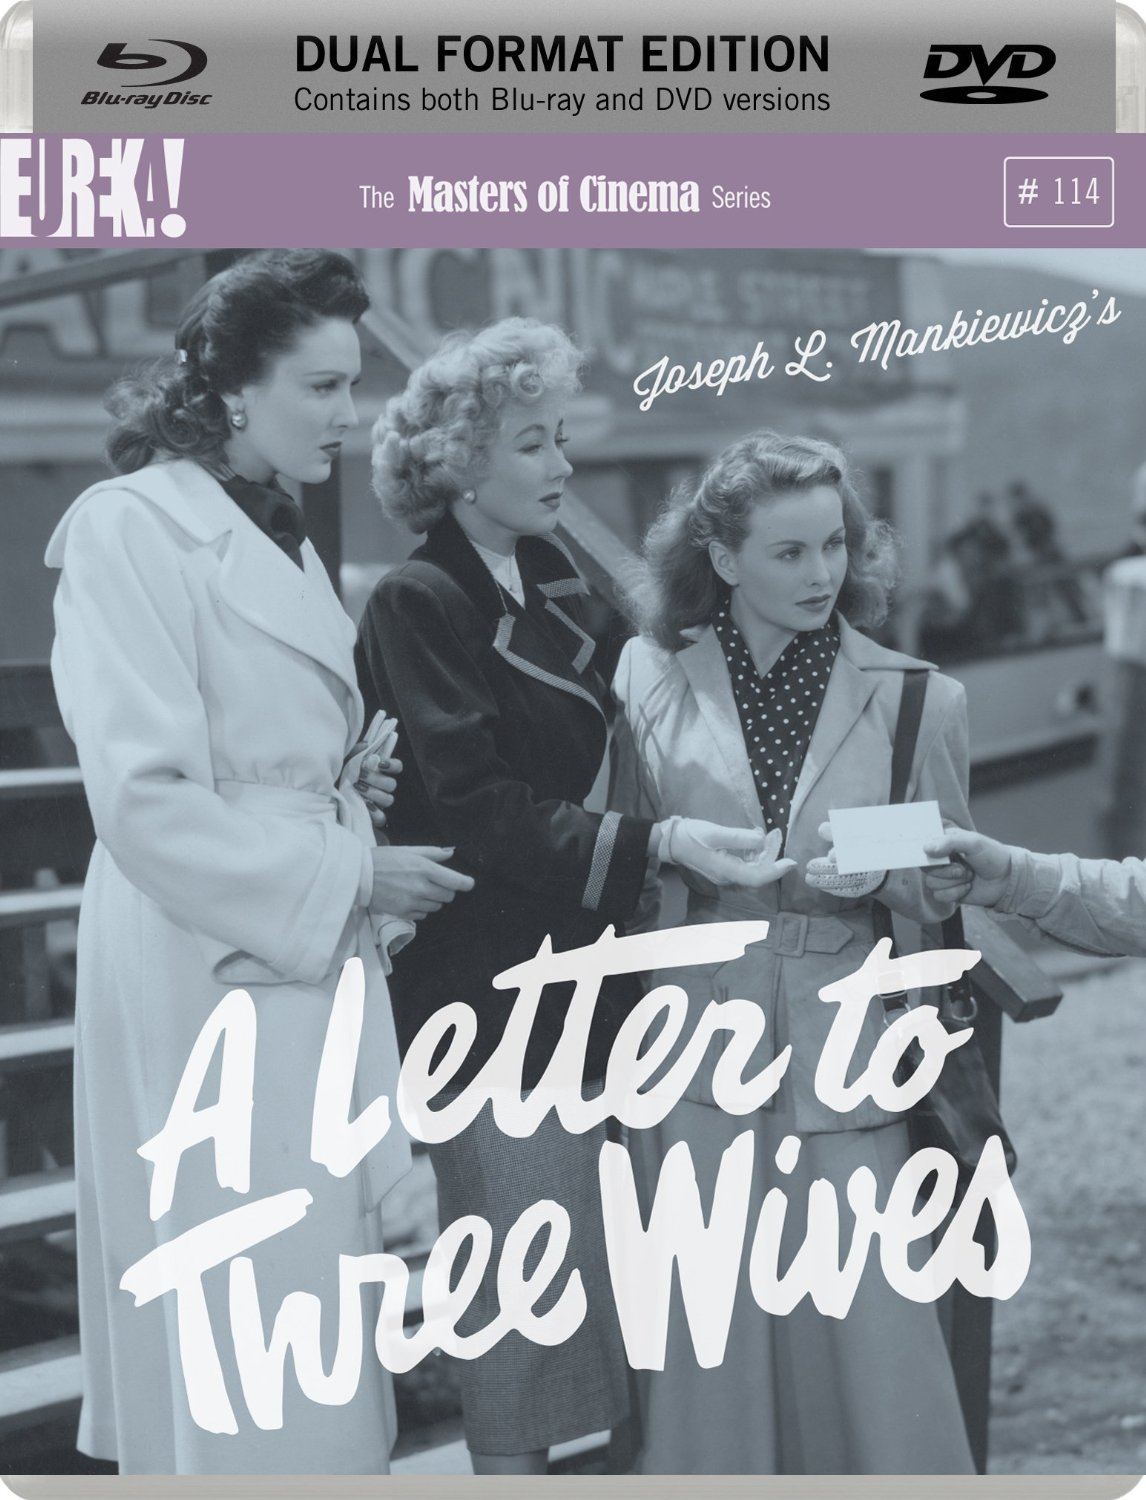 A Letter To Three Wives (Original) - DVD PLANET STORE